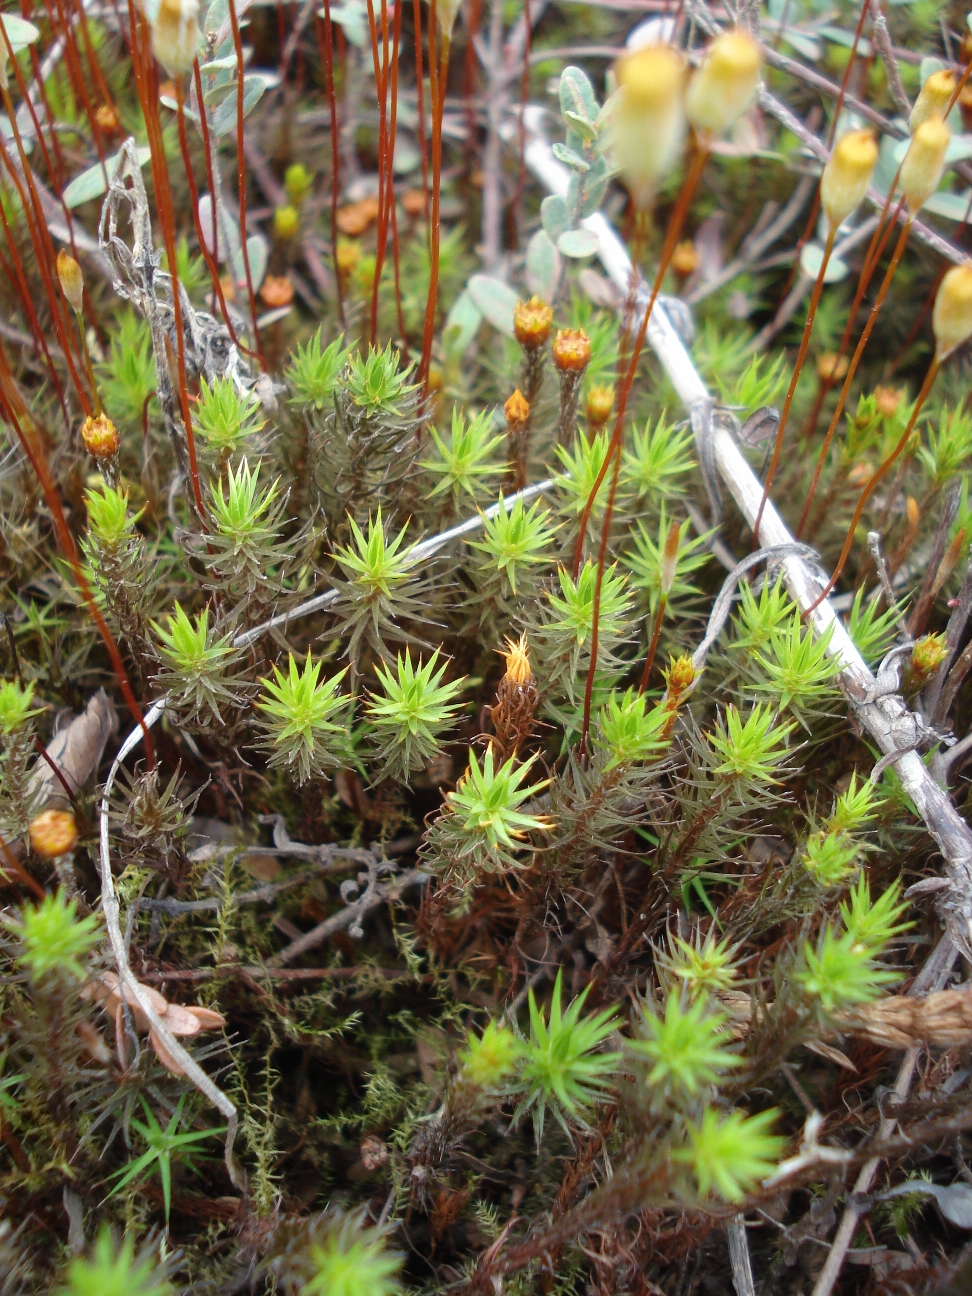 Haircap Moss - Cooperative Extension: Cranberries - University of Maine